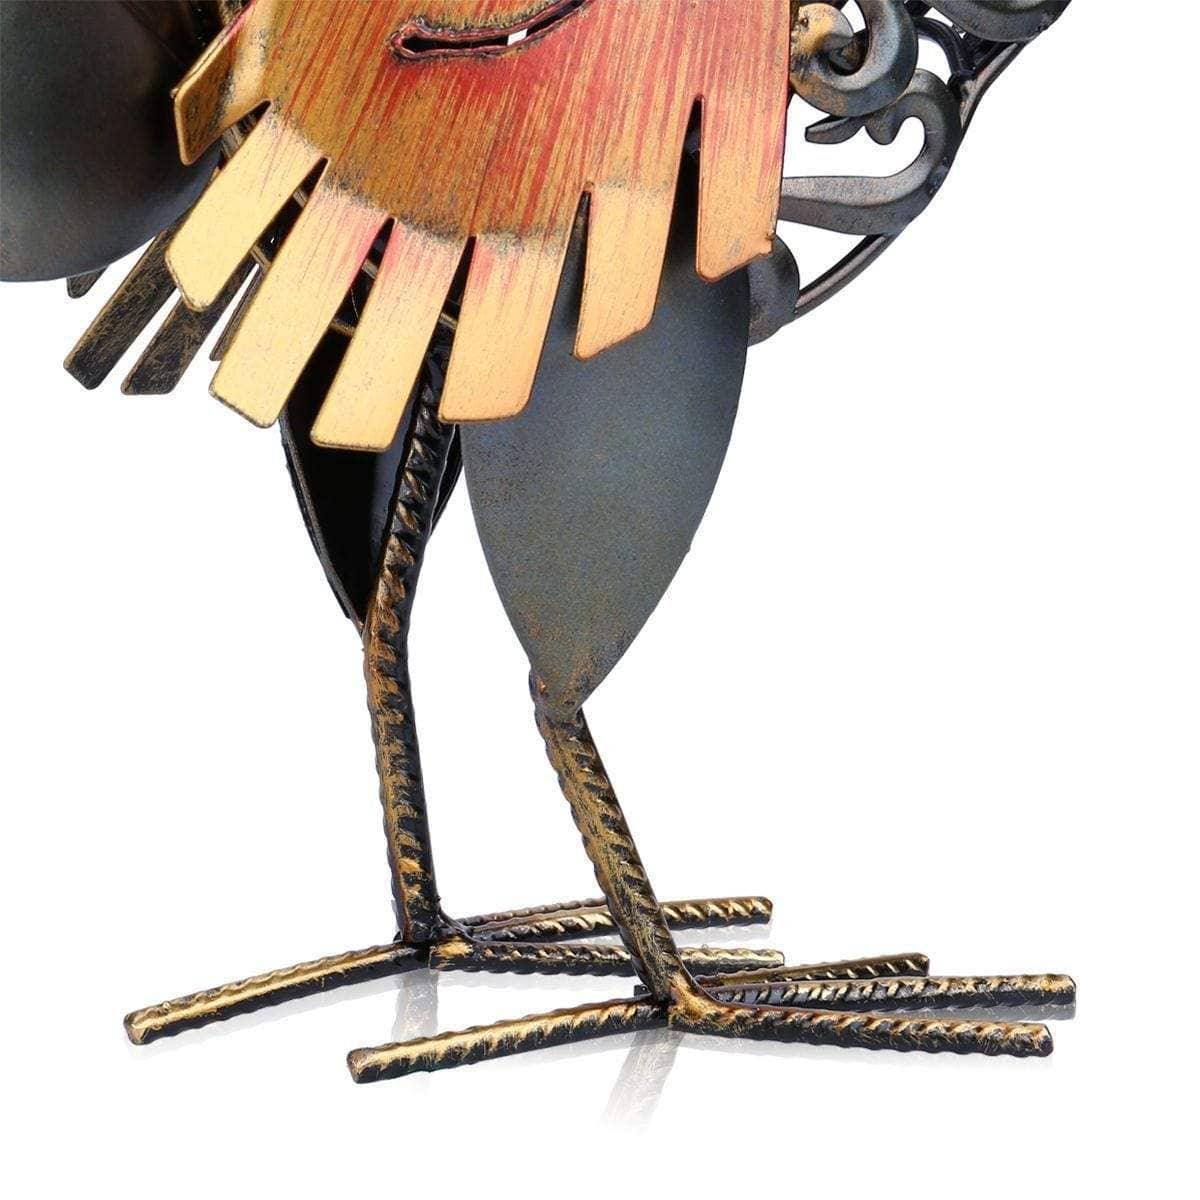 Rooster Carved Sculpture - Striking Chic